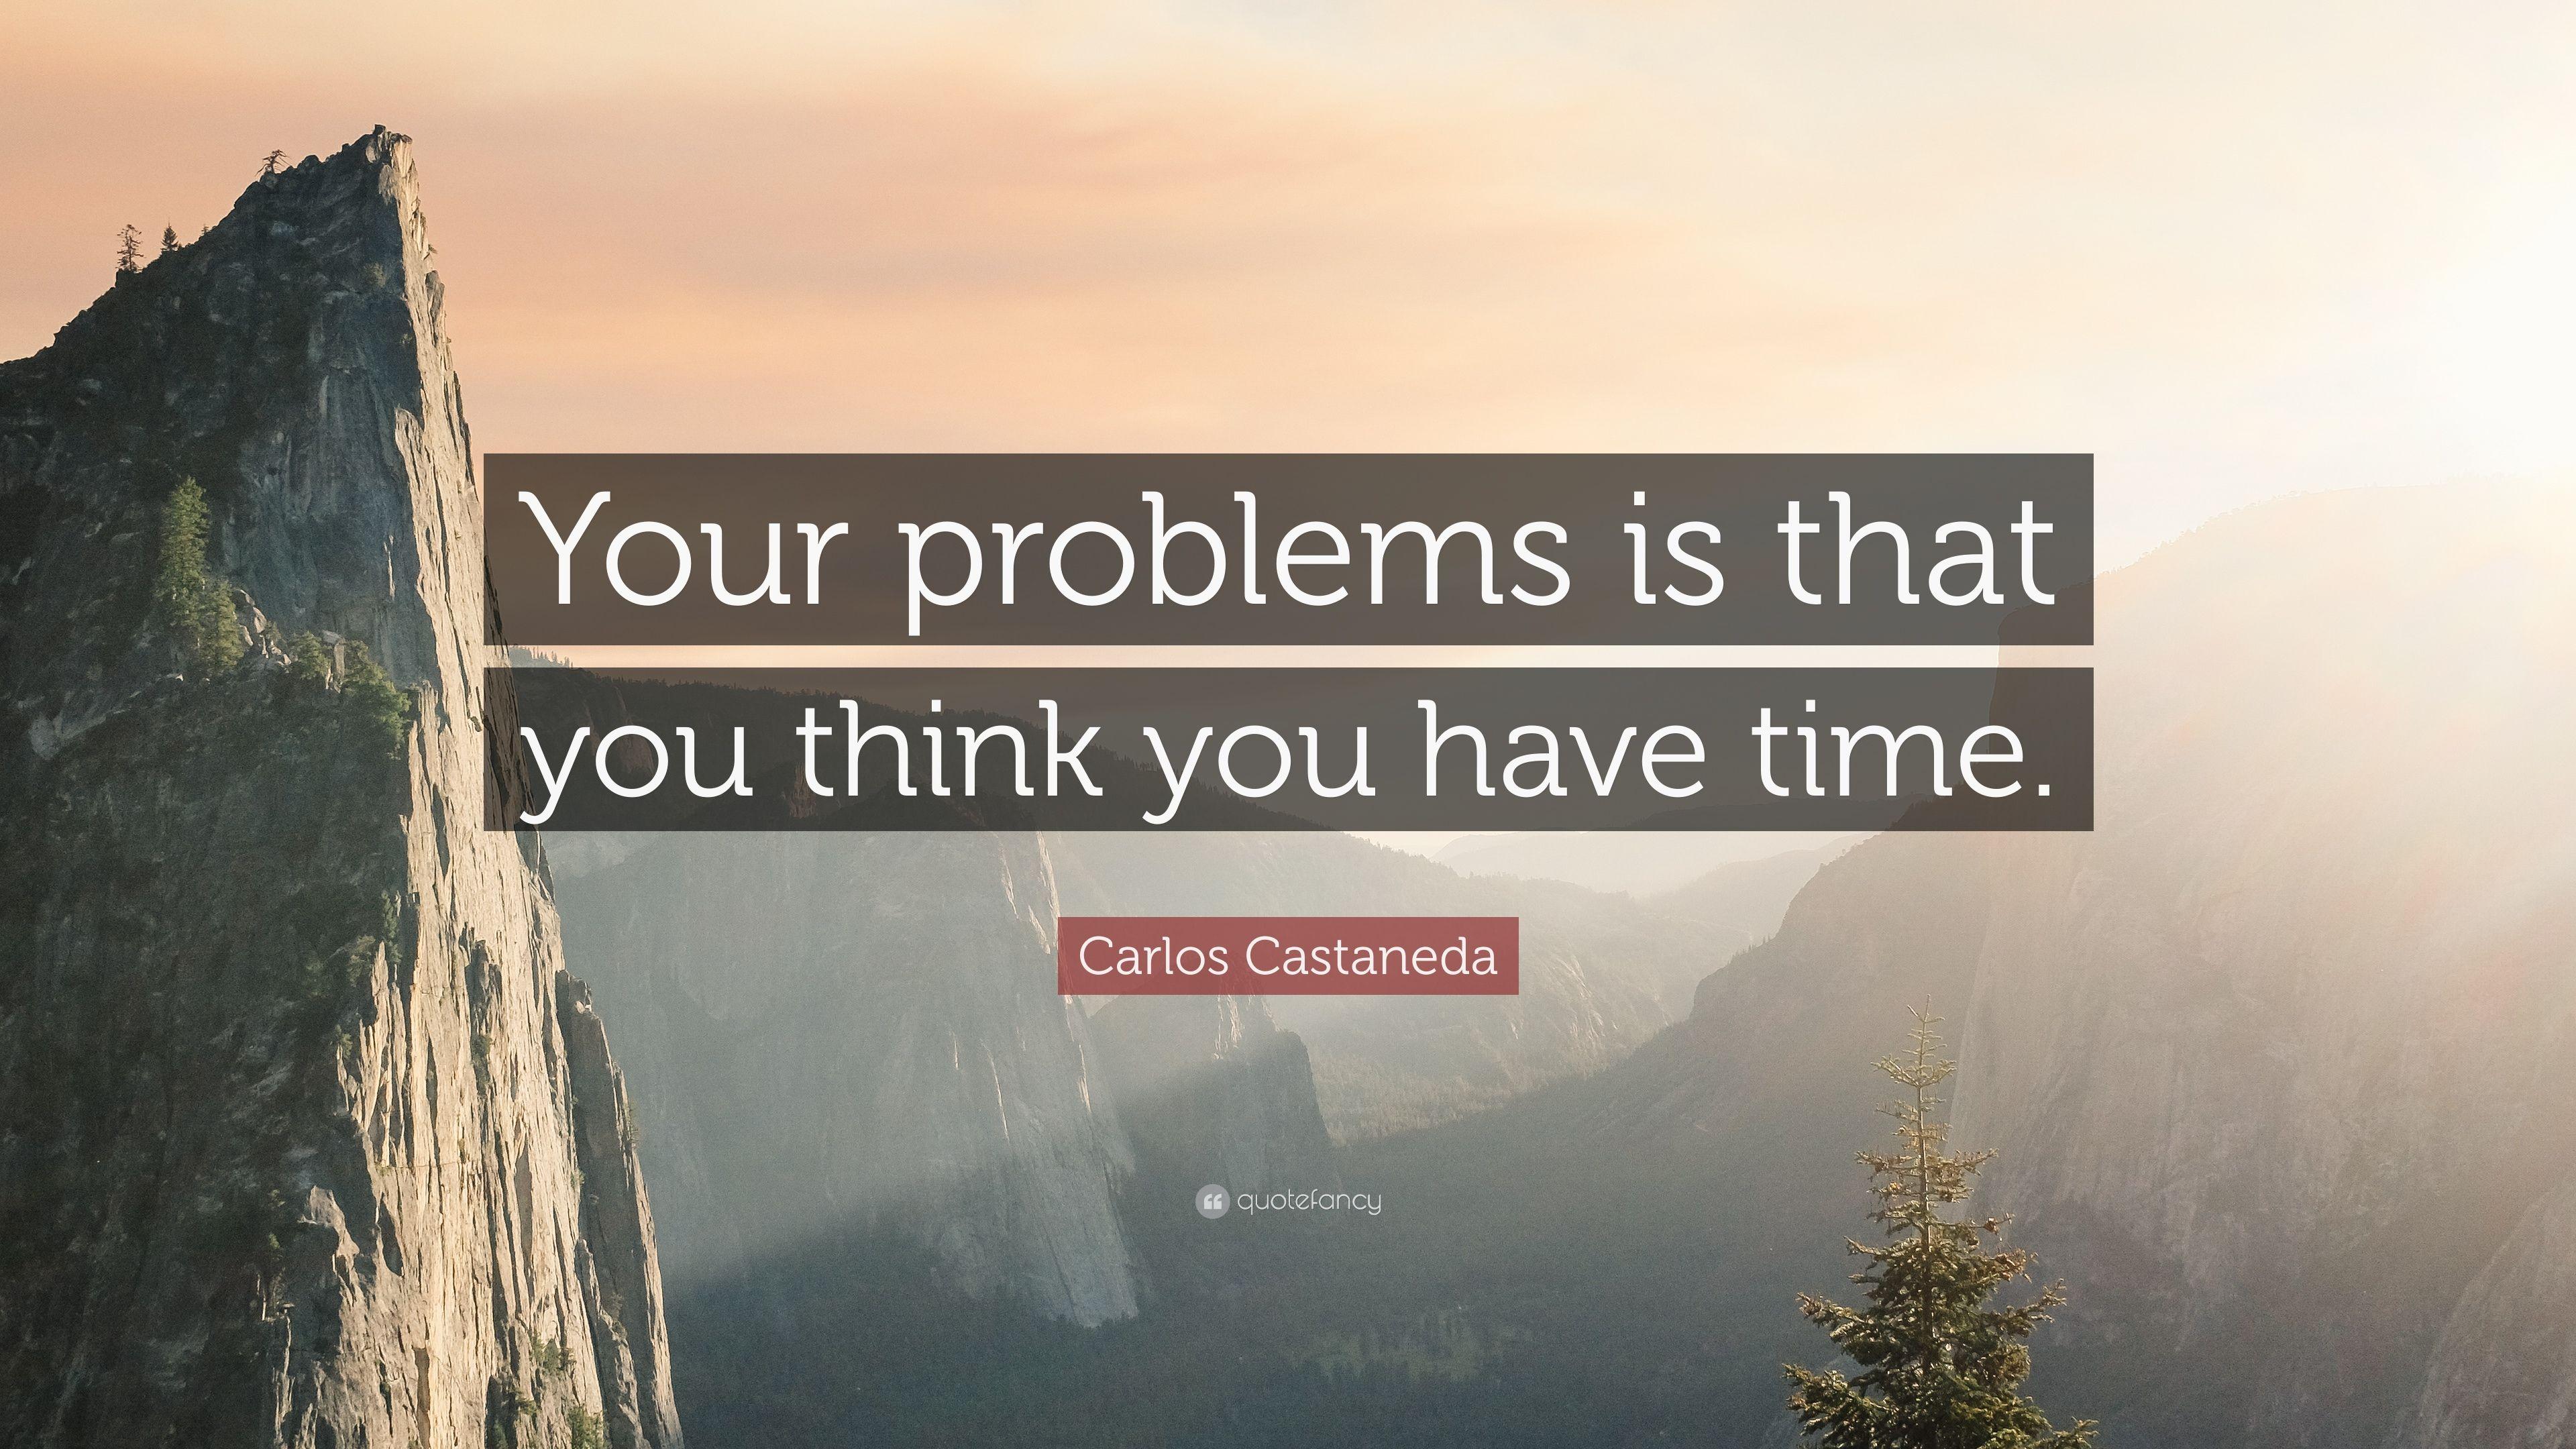 Carlos Castaneda Quote: “Your problems is that you think you have